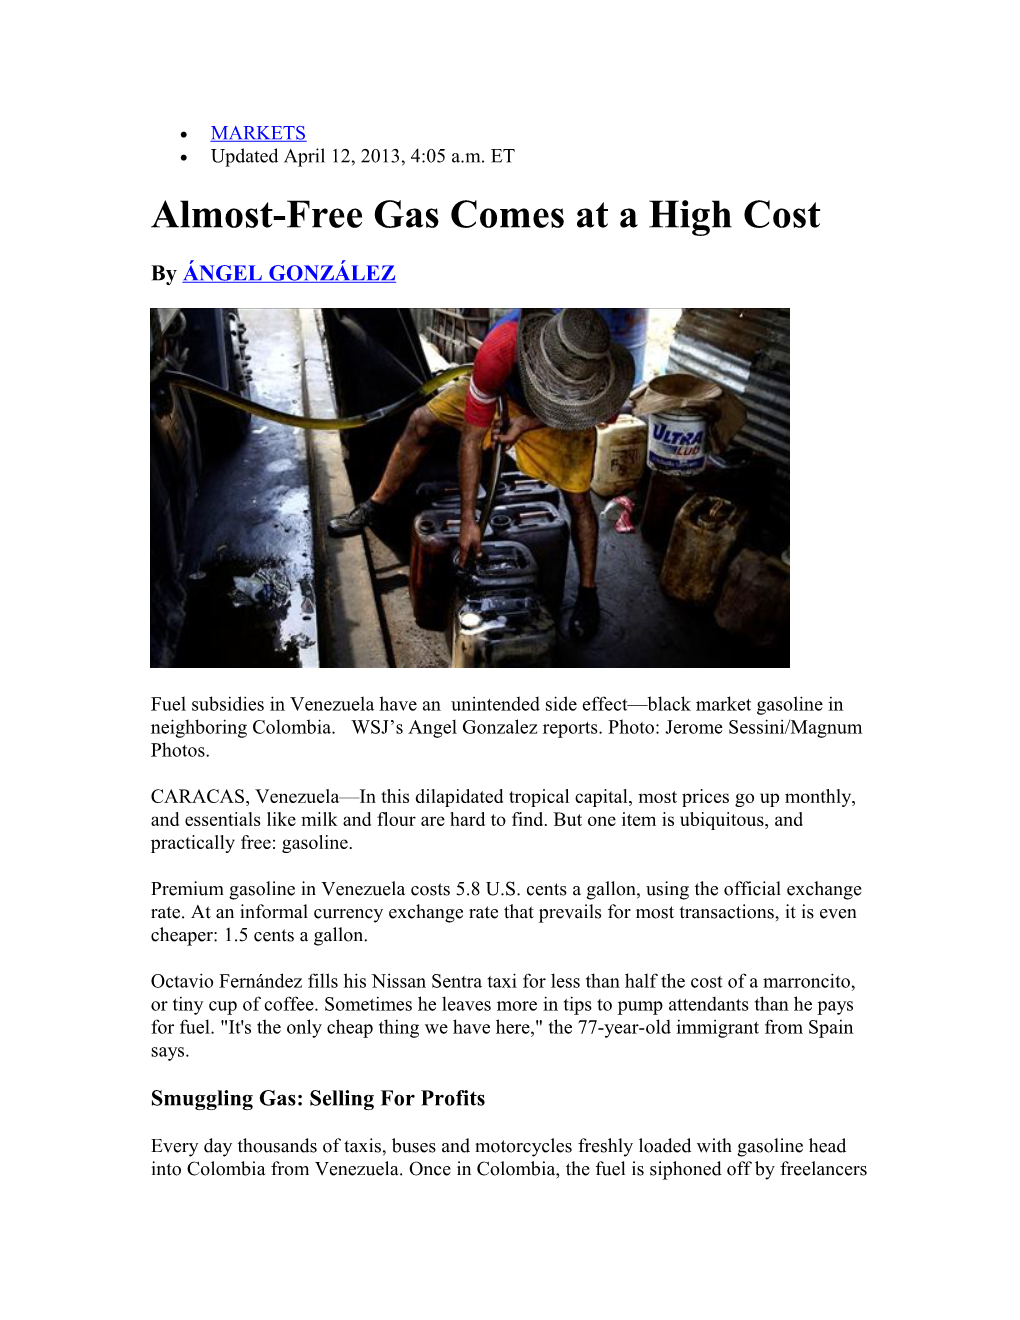 Almost-Free Gas Comes at a High Cost